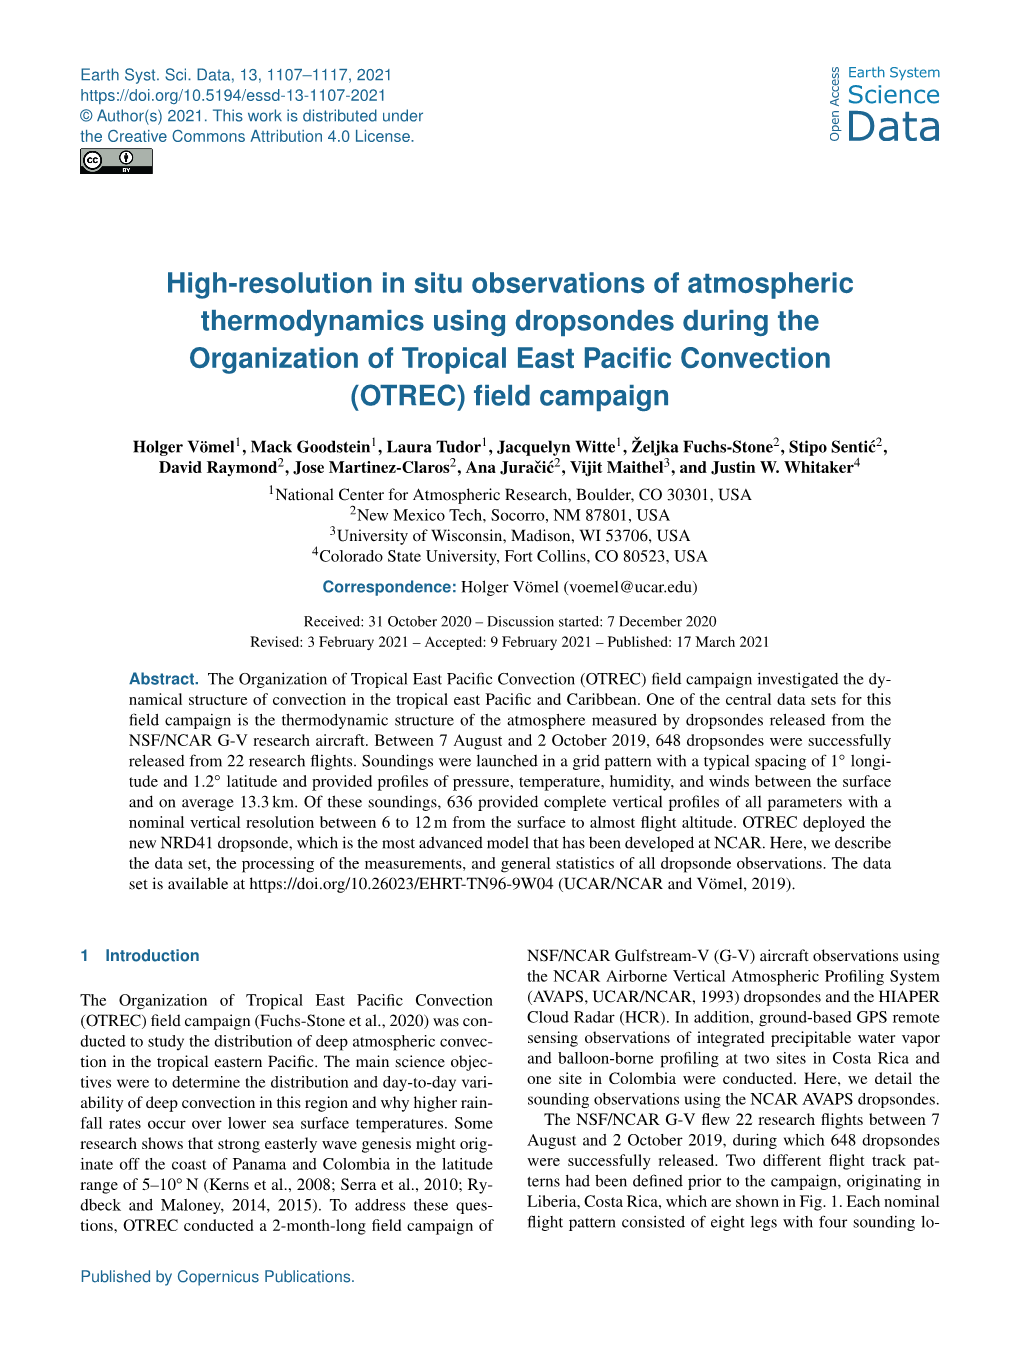 High-Resolution in Situ Observations of Atmospheric Thermodynamics Using Dropsondes During the Organization of Tropical East Paciﬁc Convection (OTREC) ﬁeld Campaign